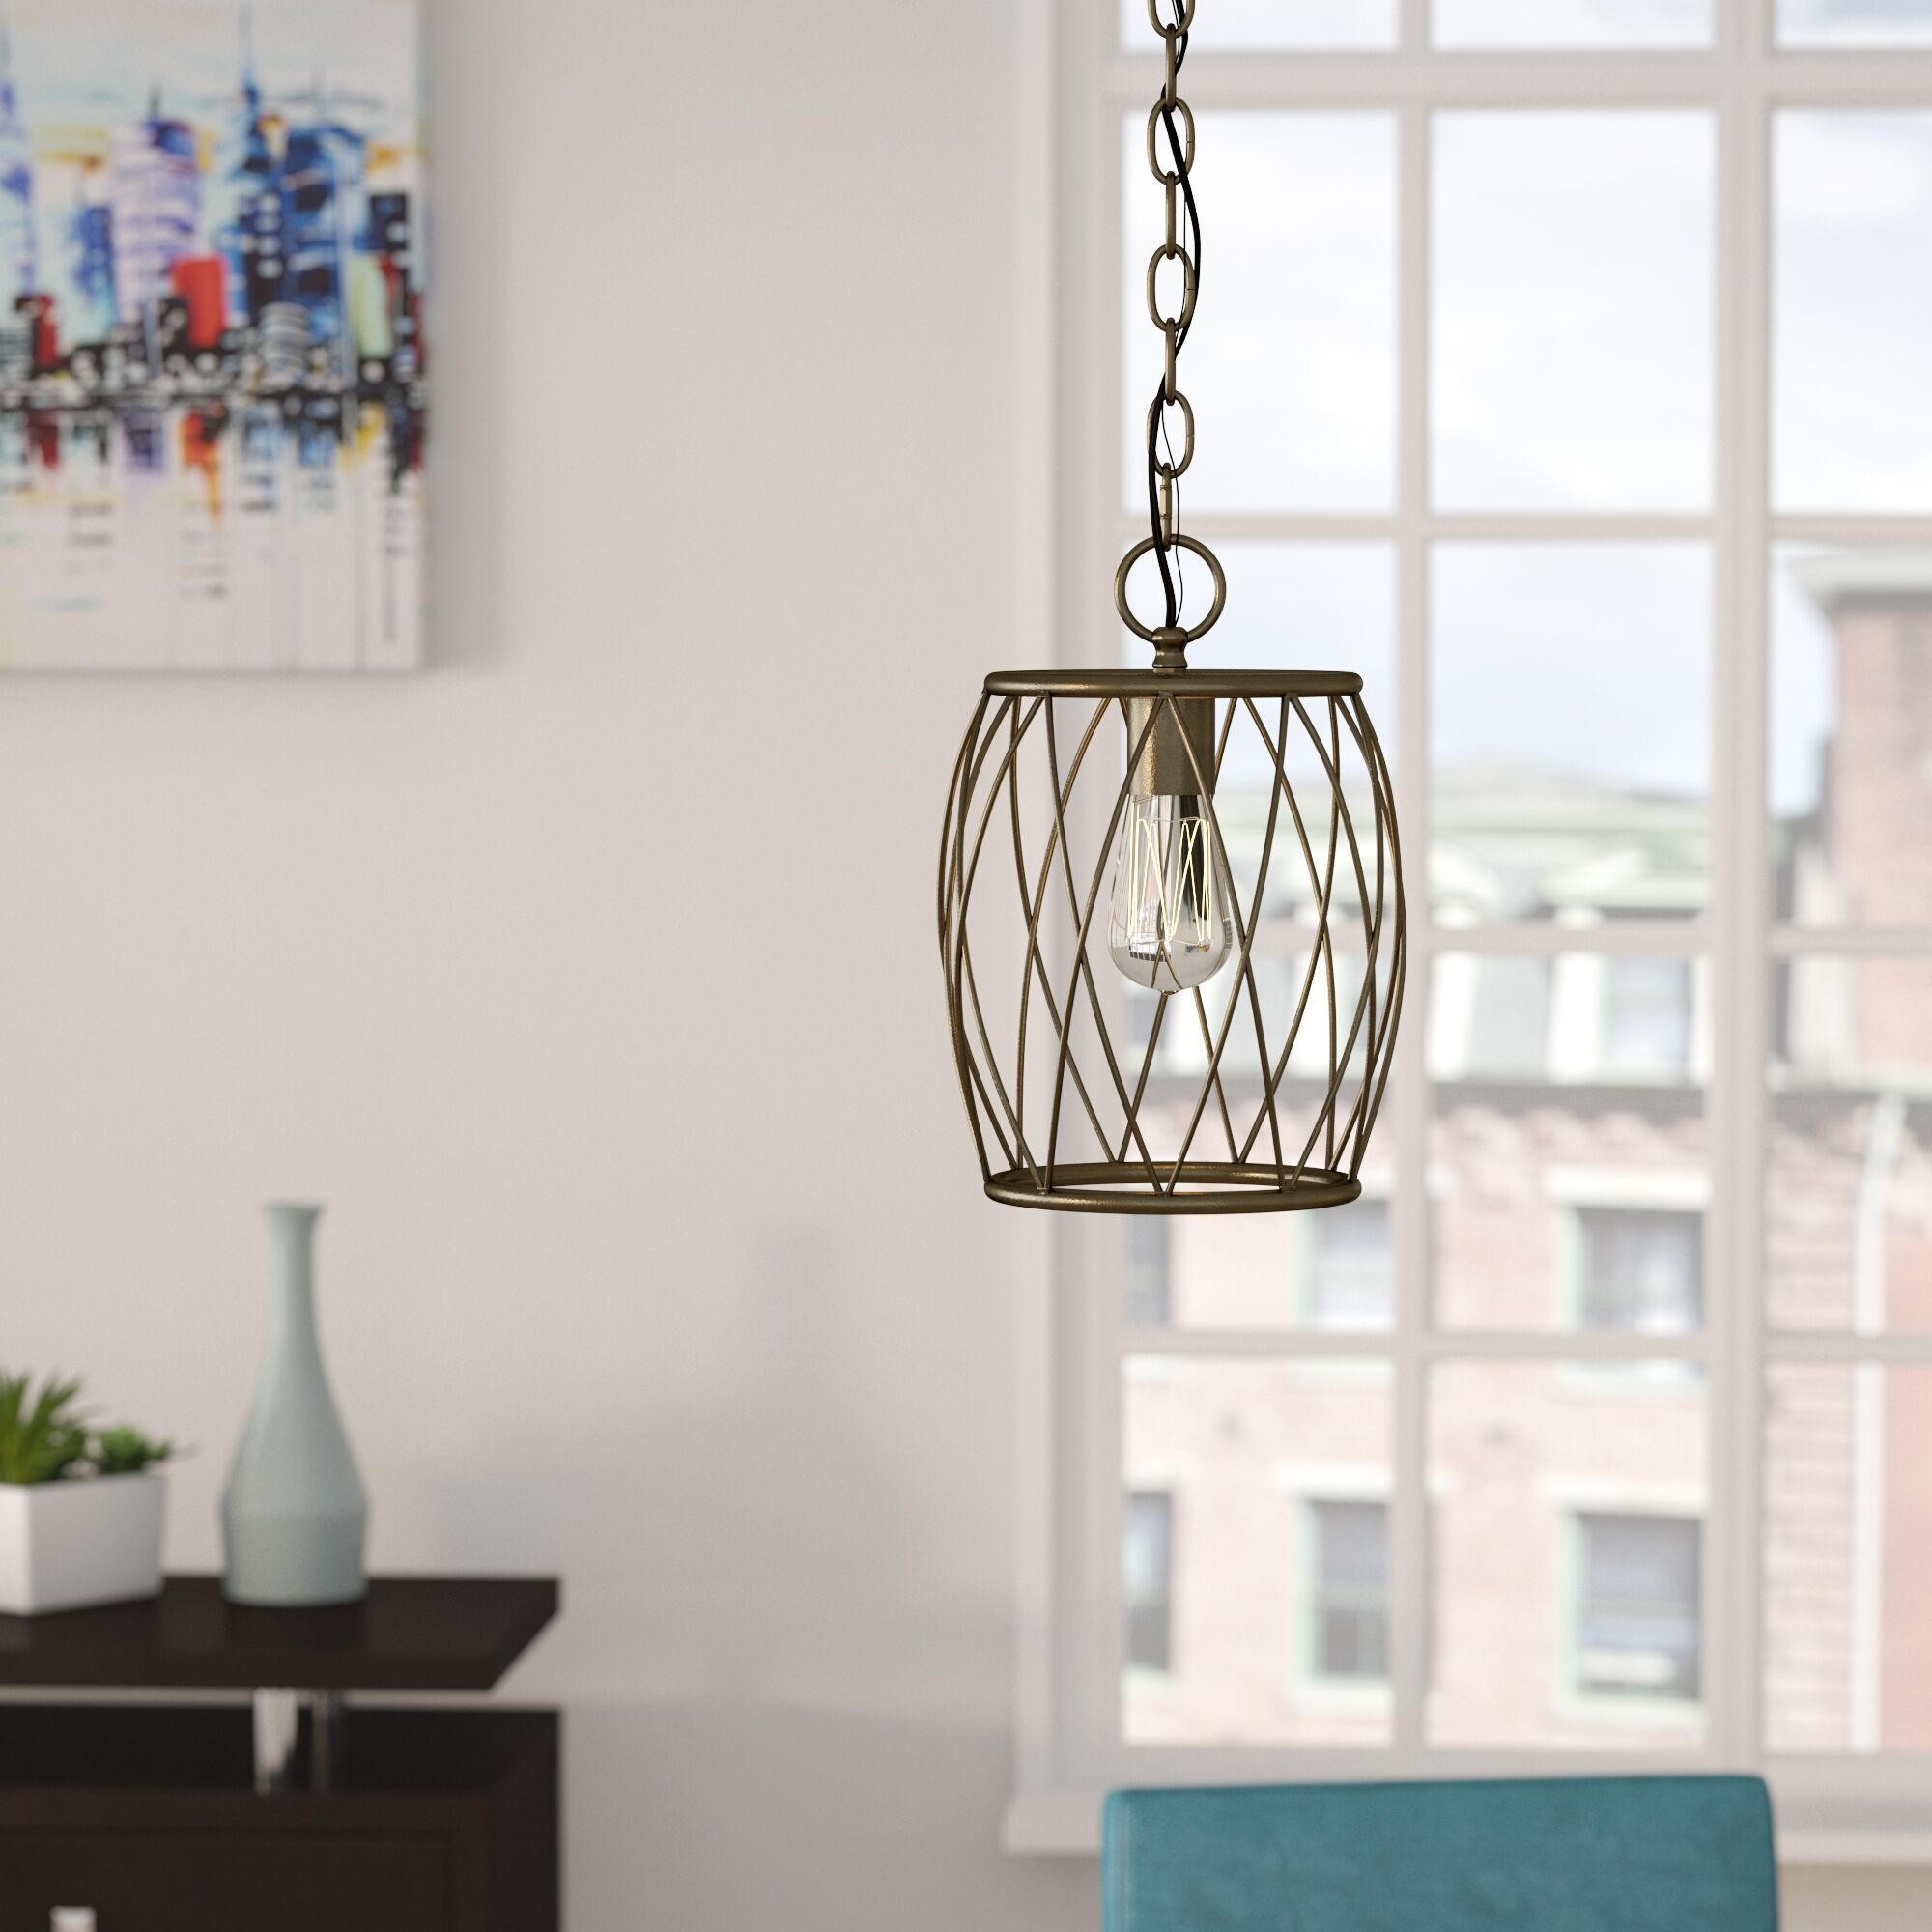 Chandeliers Genzano 12 Light Chandelier May 2019 Pertaining To Poynter 1 Light Single Cylinder Pendants (View 25 of 30)